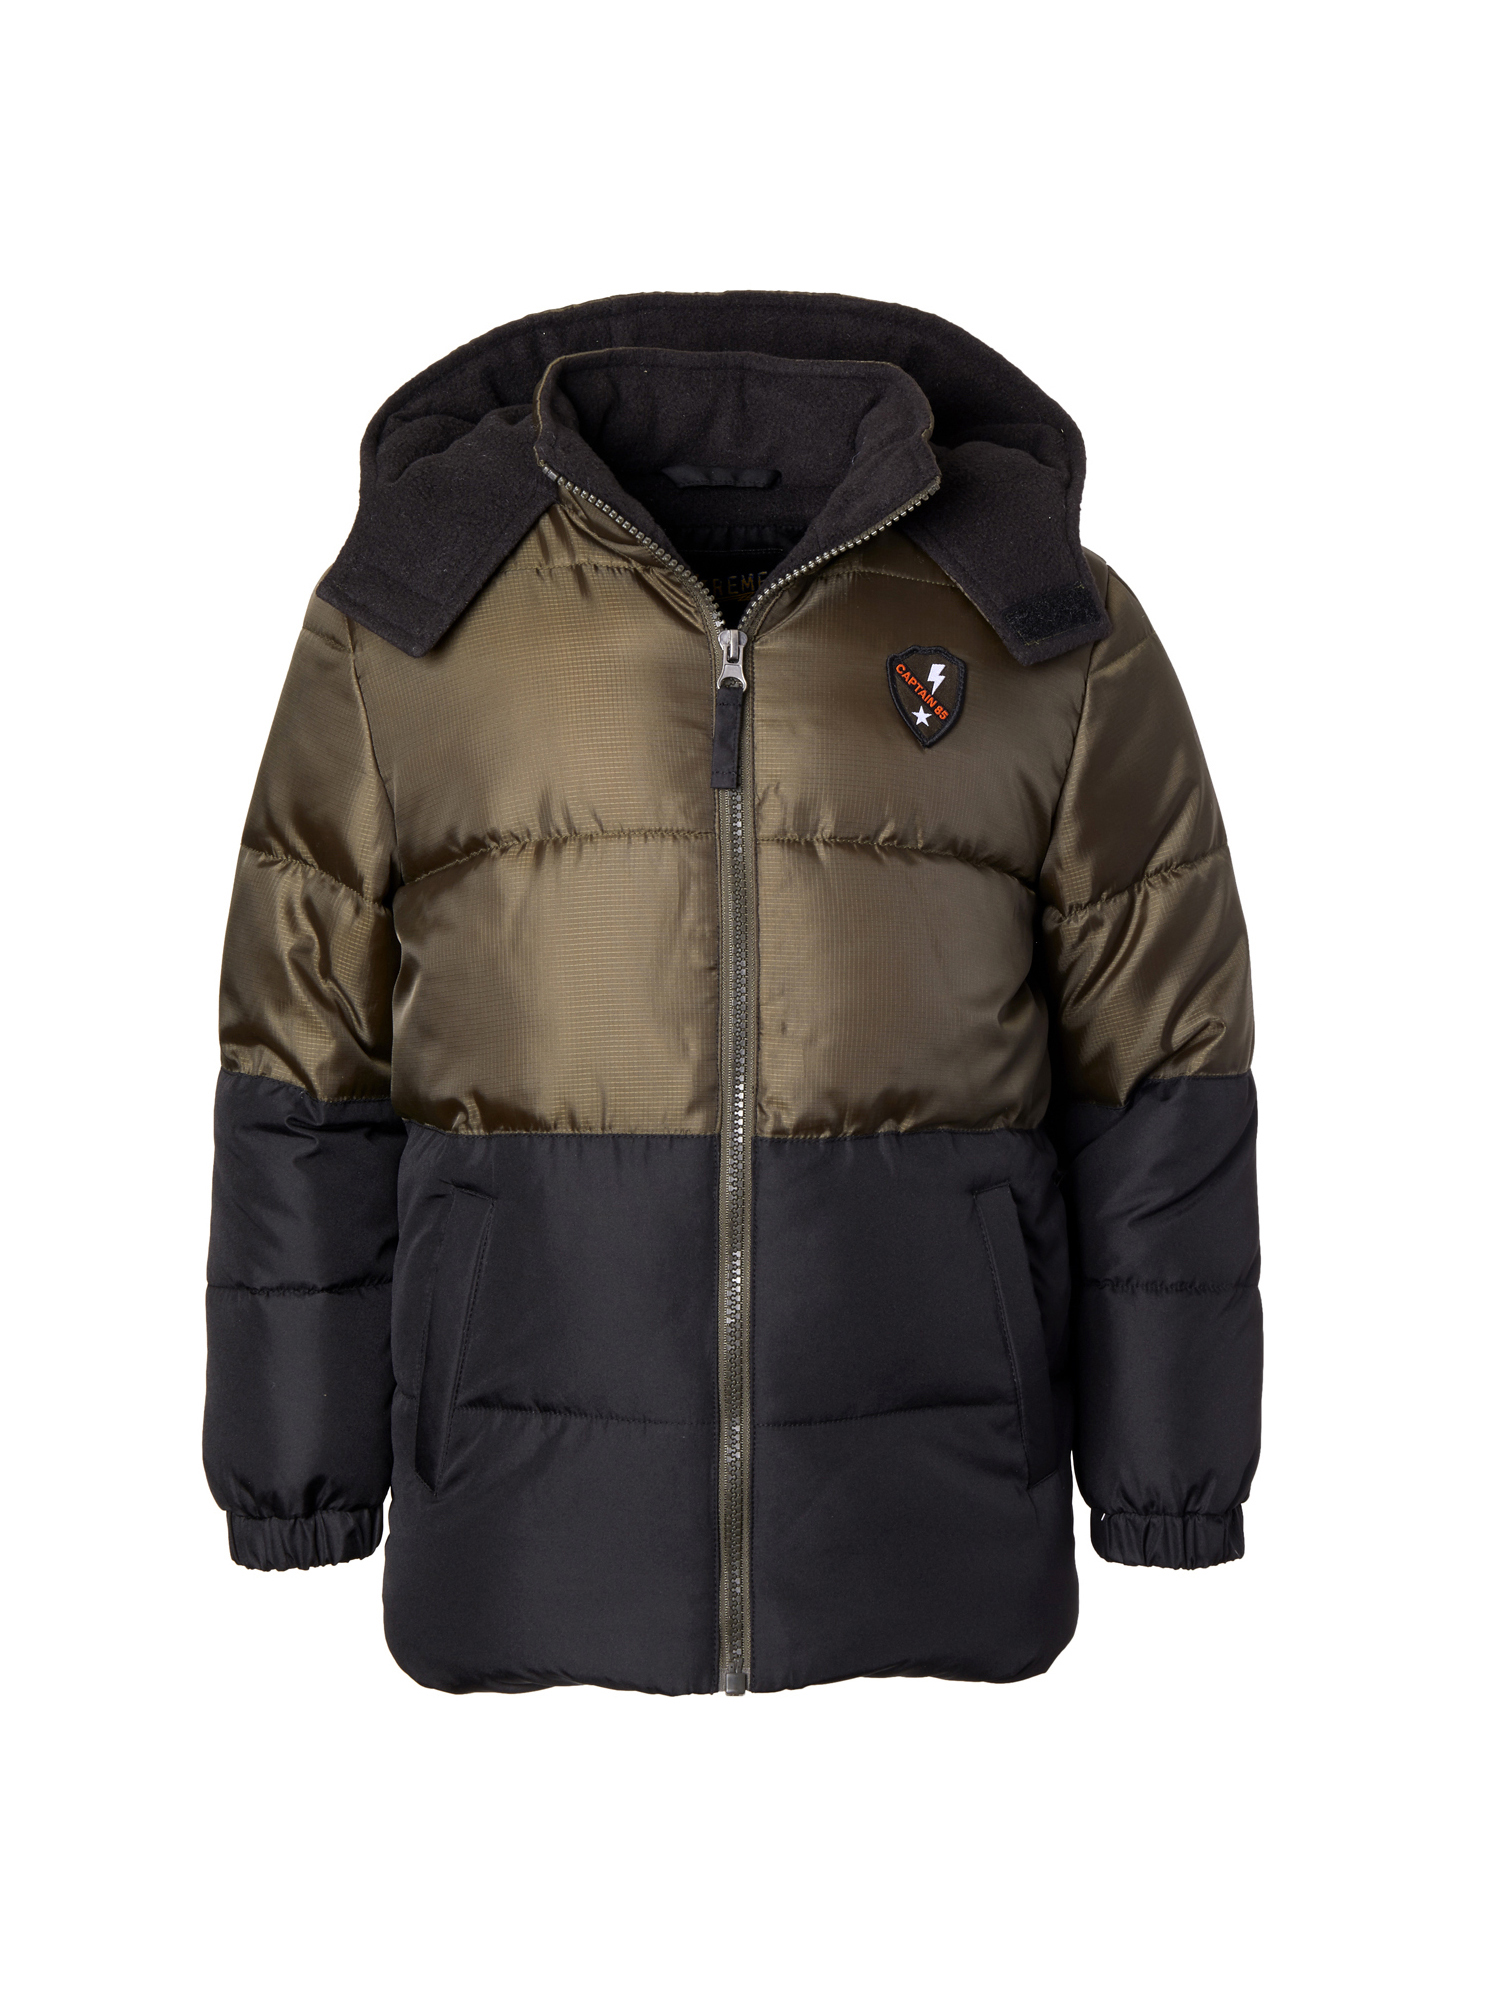 iXtreme Colorblock Puffer Jacket with Front Patch (Little Boys & Big Boys) - image 2 of 3